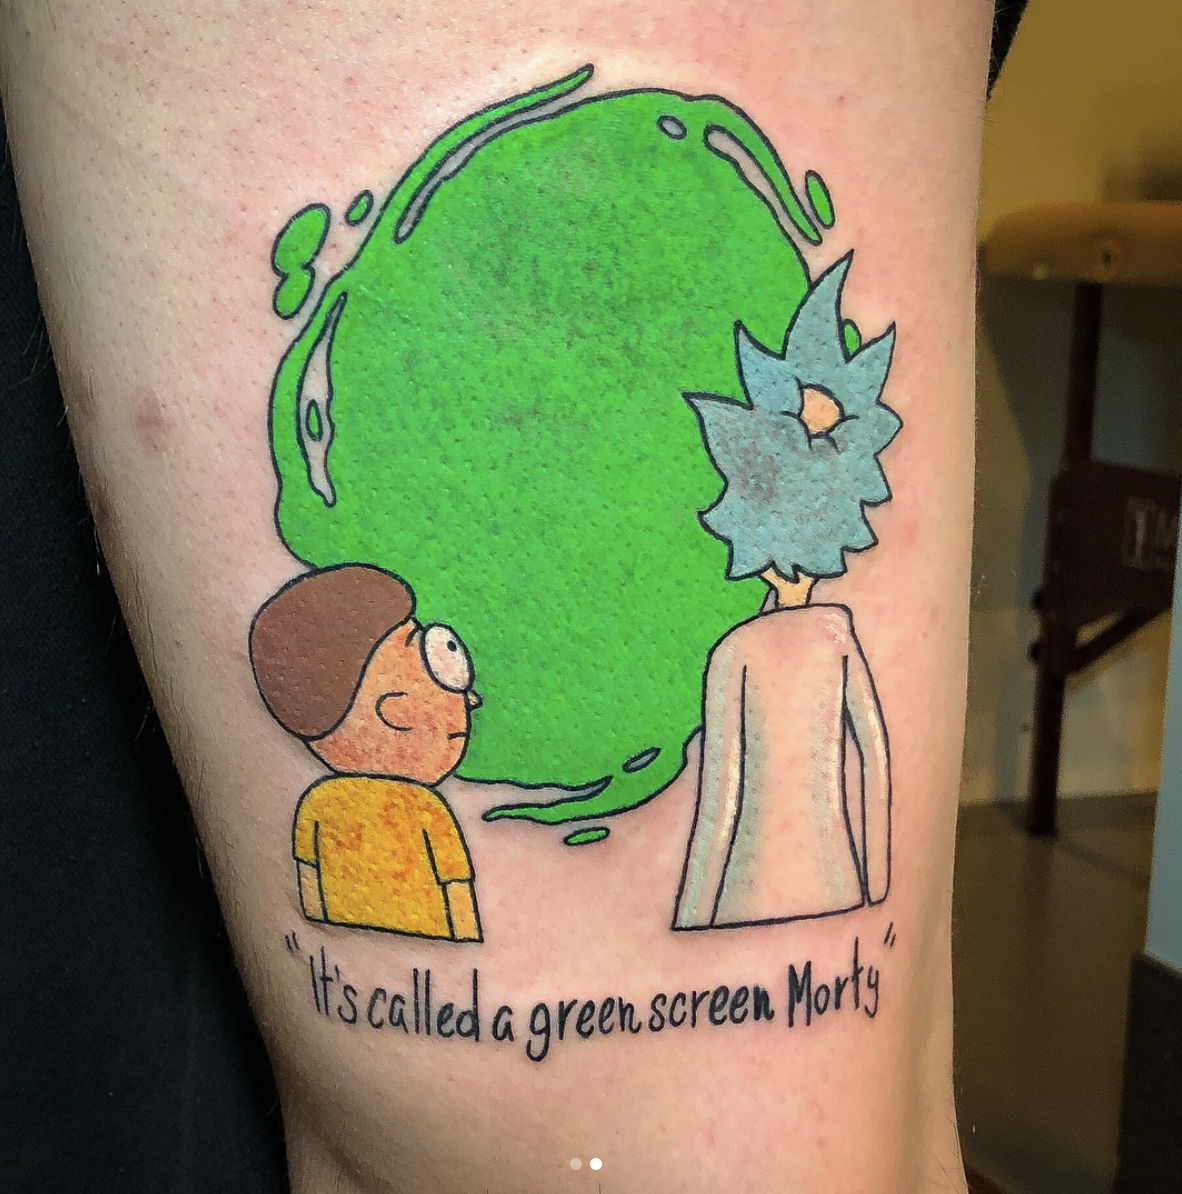 Download Mp3 Rick And Morty Tattoo Small or Listen Free 982 MB  MP3  Music Download